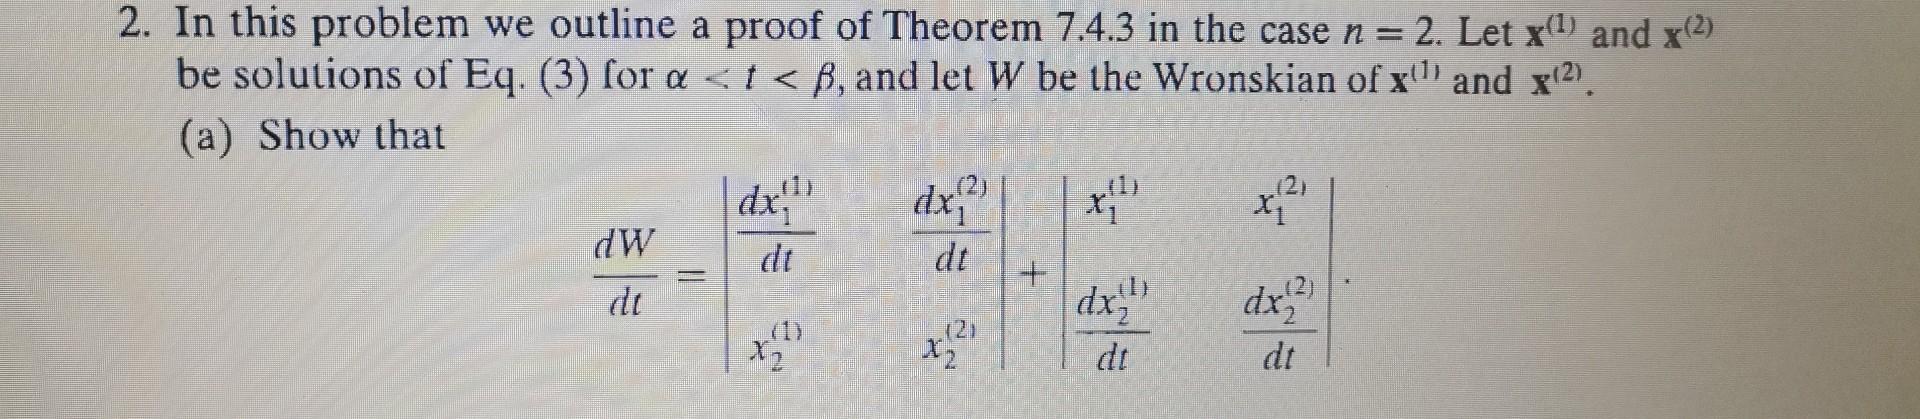 2. In this problem we outline a proof of Theorem 7.4.3 in the case \( n=2 \). Let \( \mathbf{x}^{(1)} \) and \( \mathbf{x}^{(